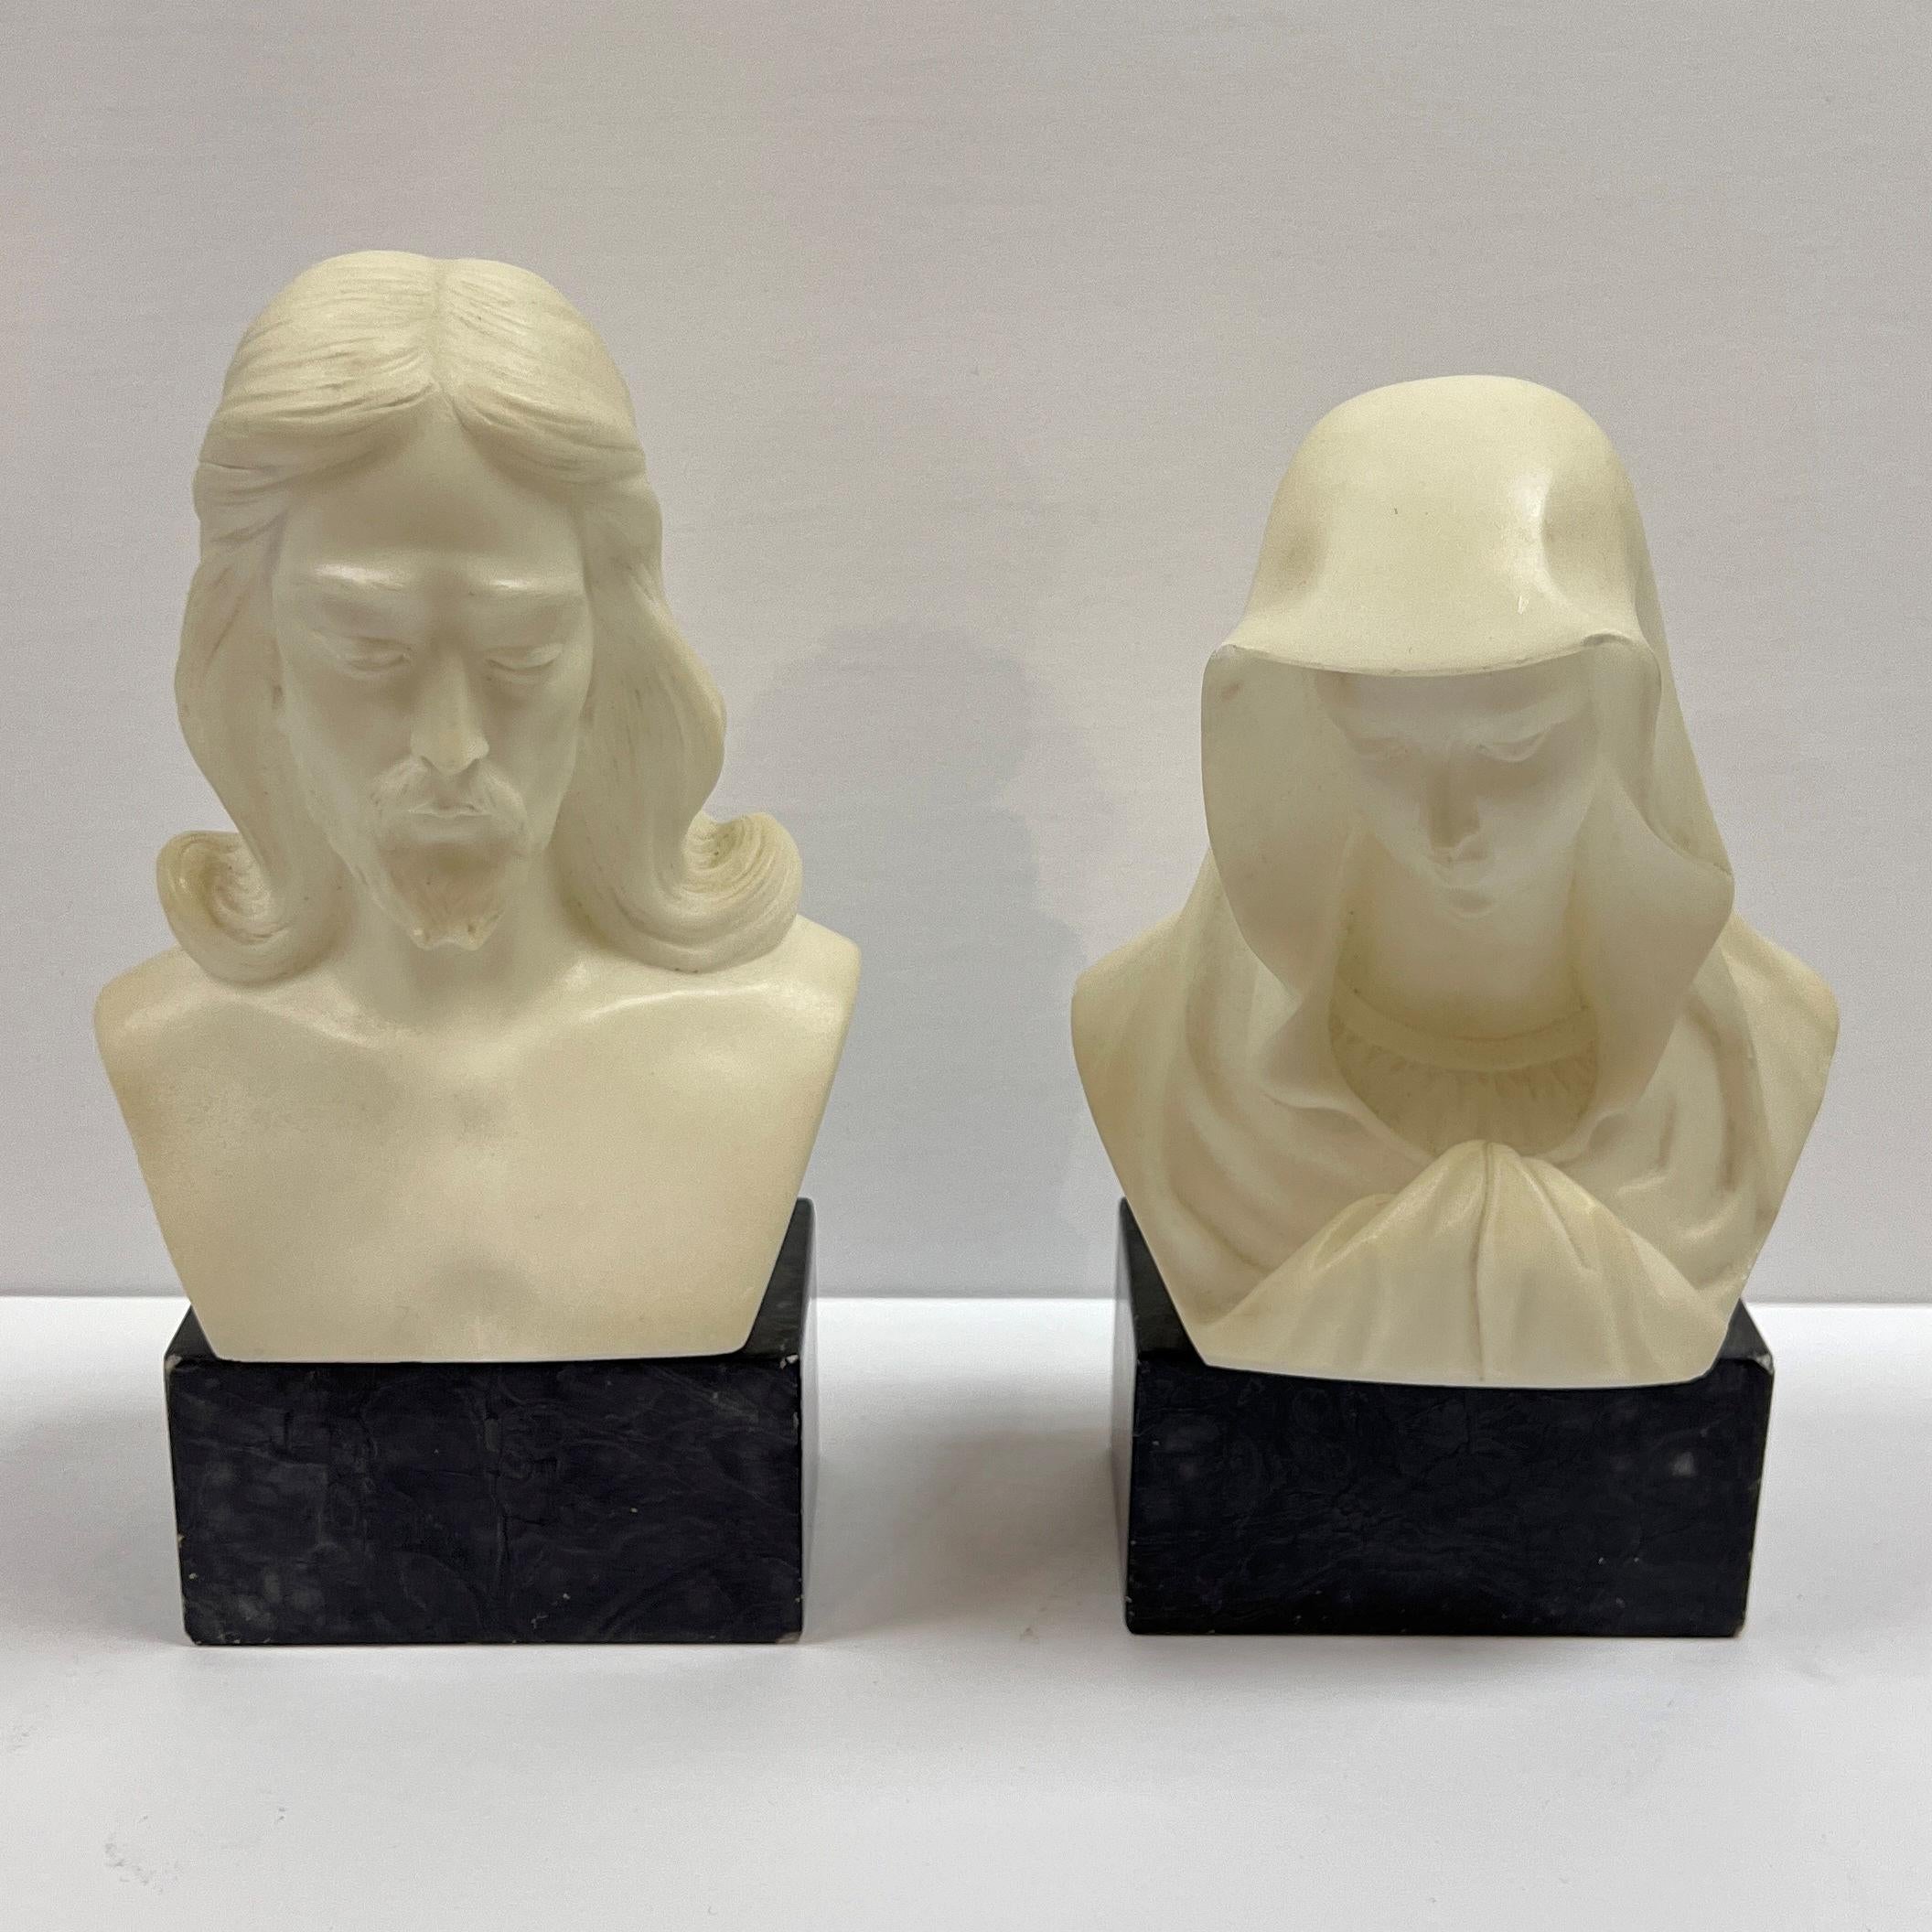 Hand-Carved Giuseppe Bessi Marble Busts of Jesus and Mary